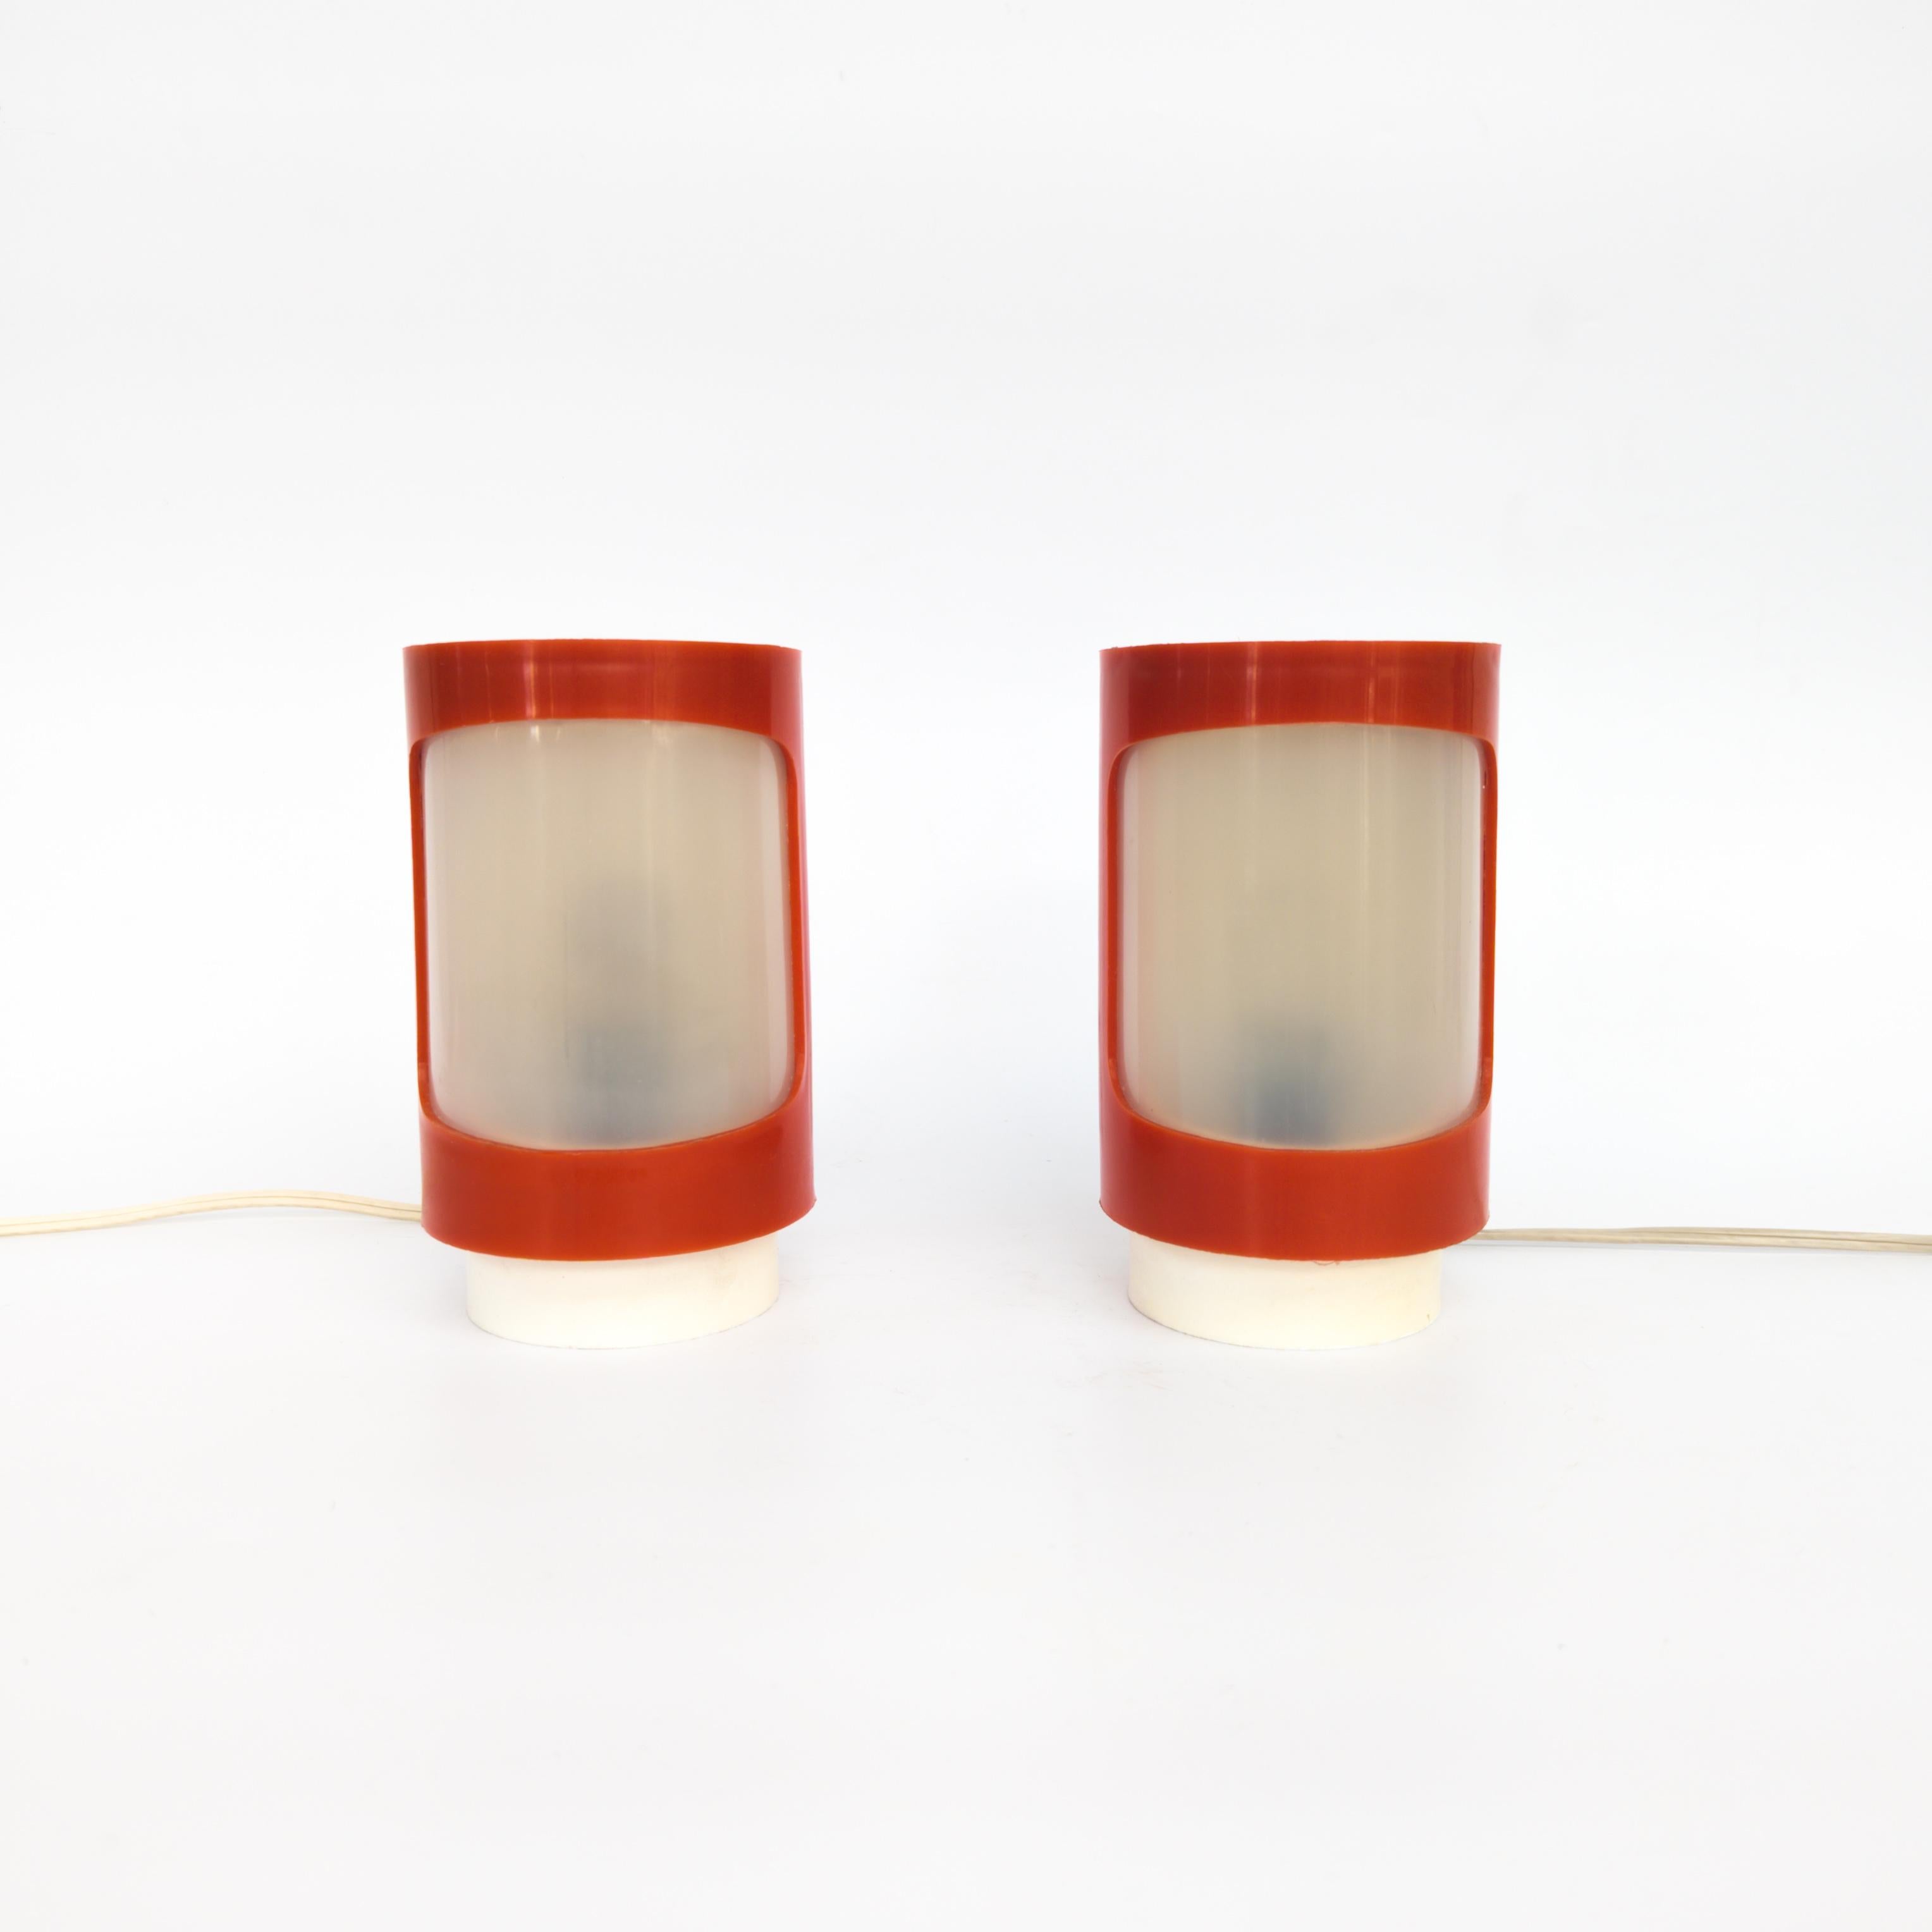 Manufactured by Elektrosvit, former Czechoslovakia in the 1960. These little lamps called 